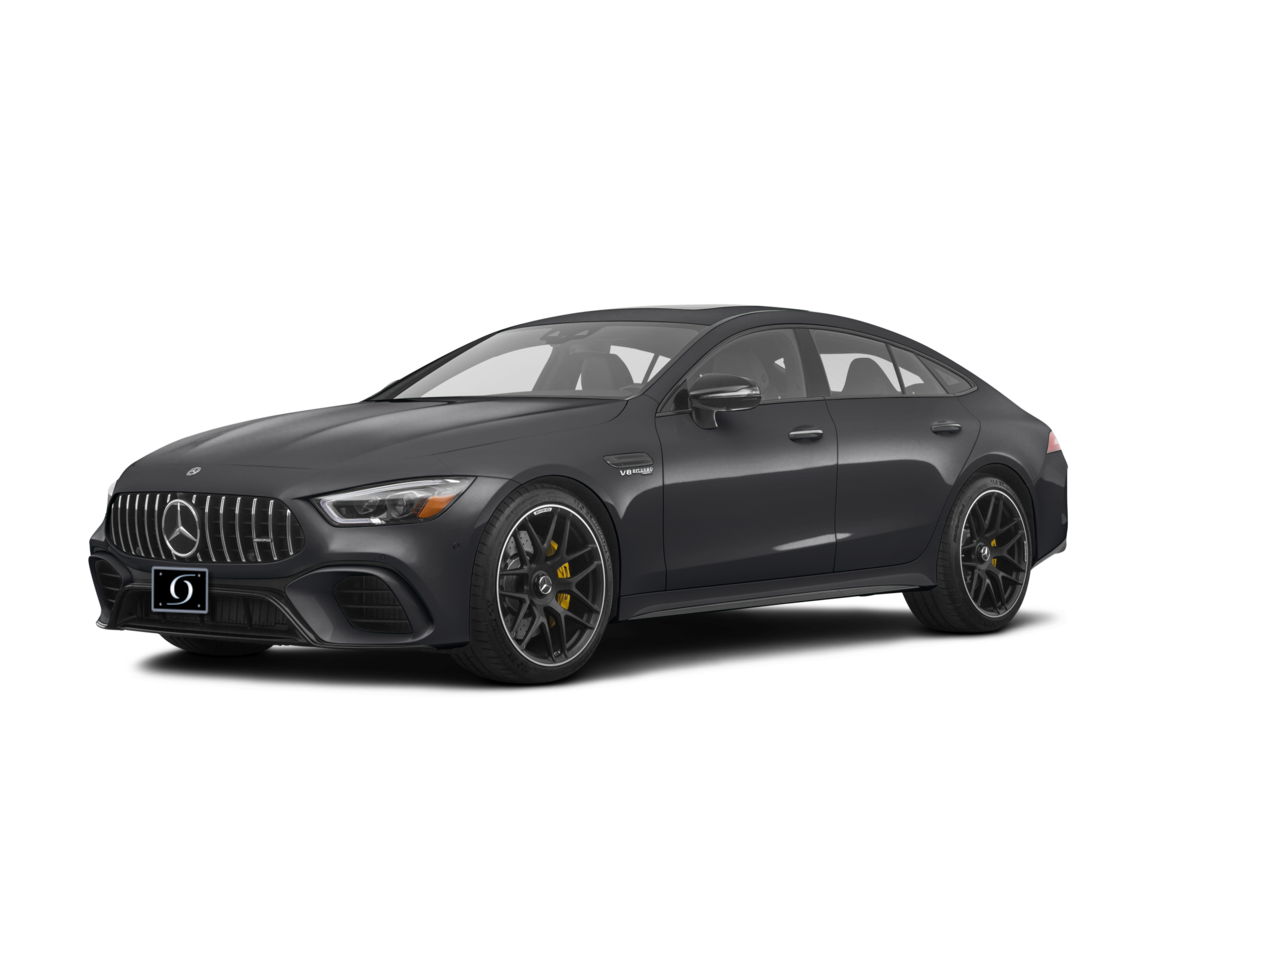 2021 Mercedes AMG GT 63 S 4-Door Coupe Lease Deal | Omega Auto Group